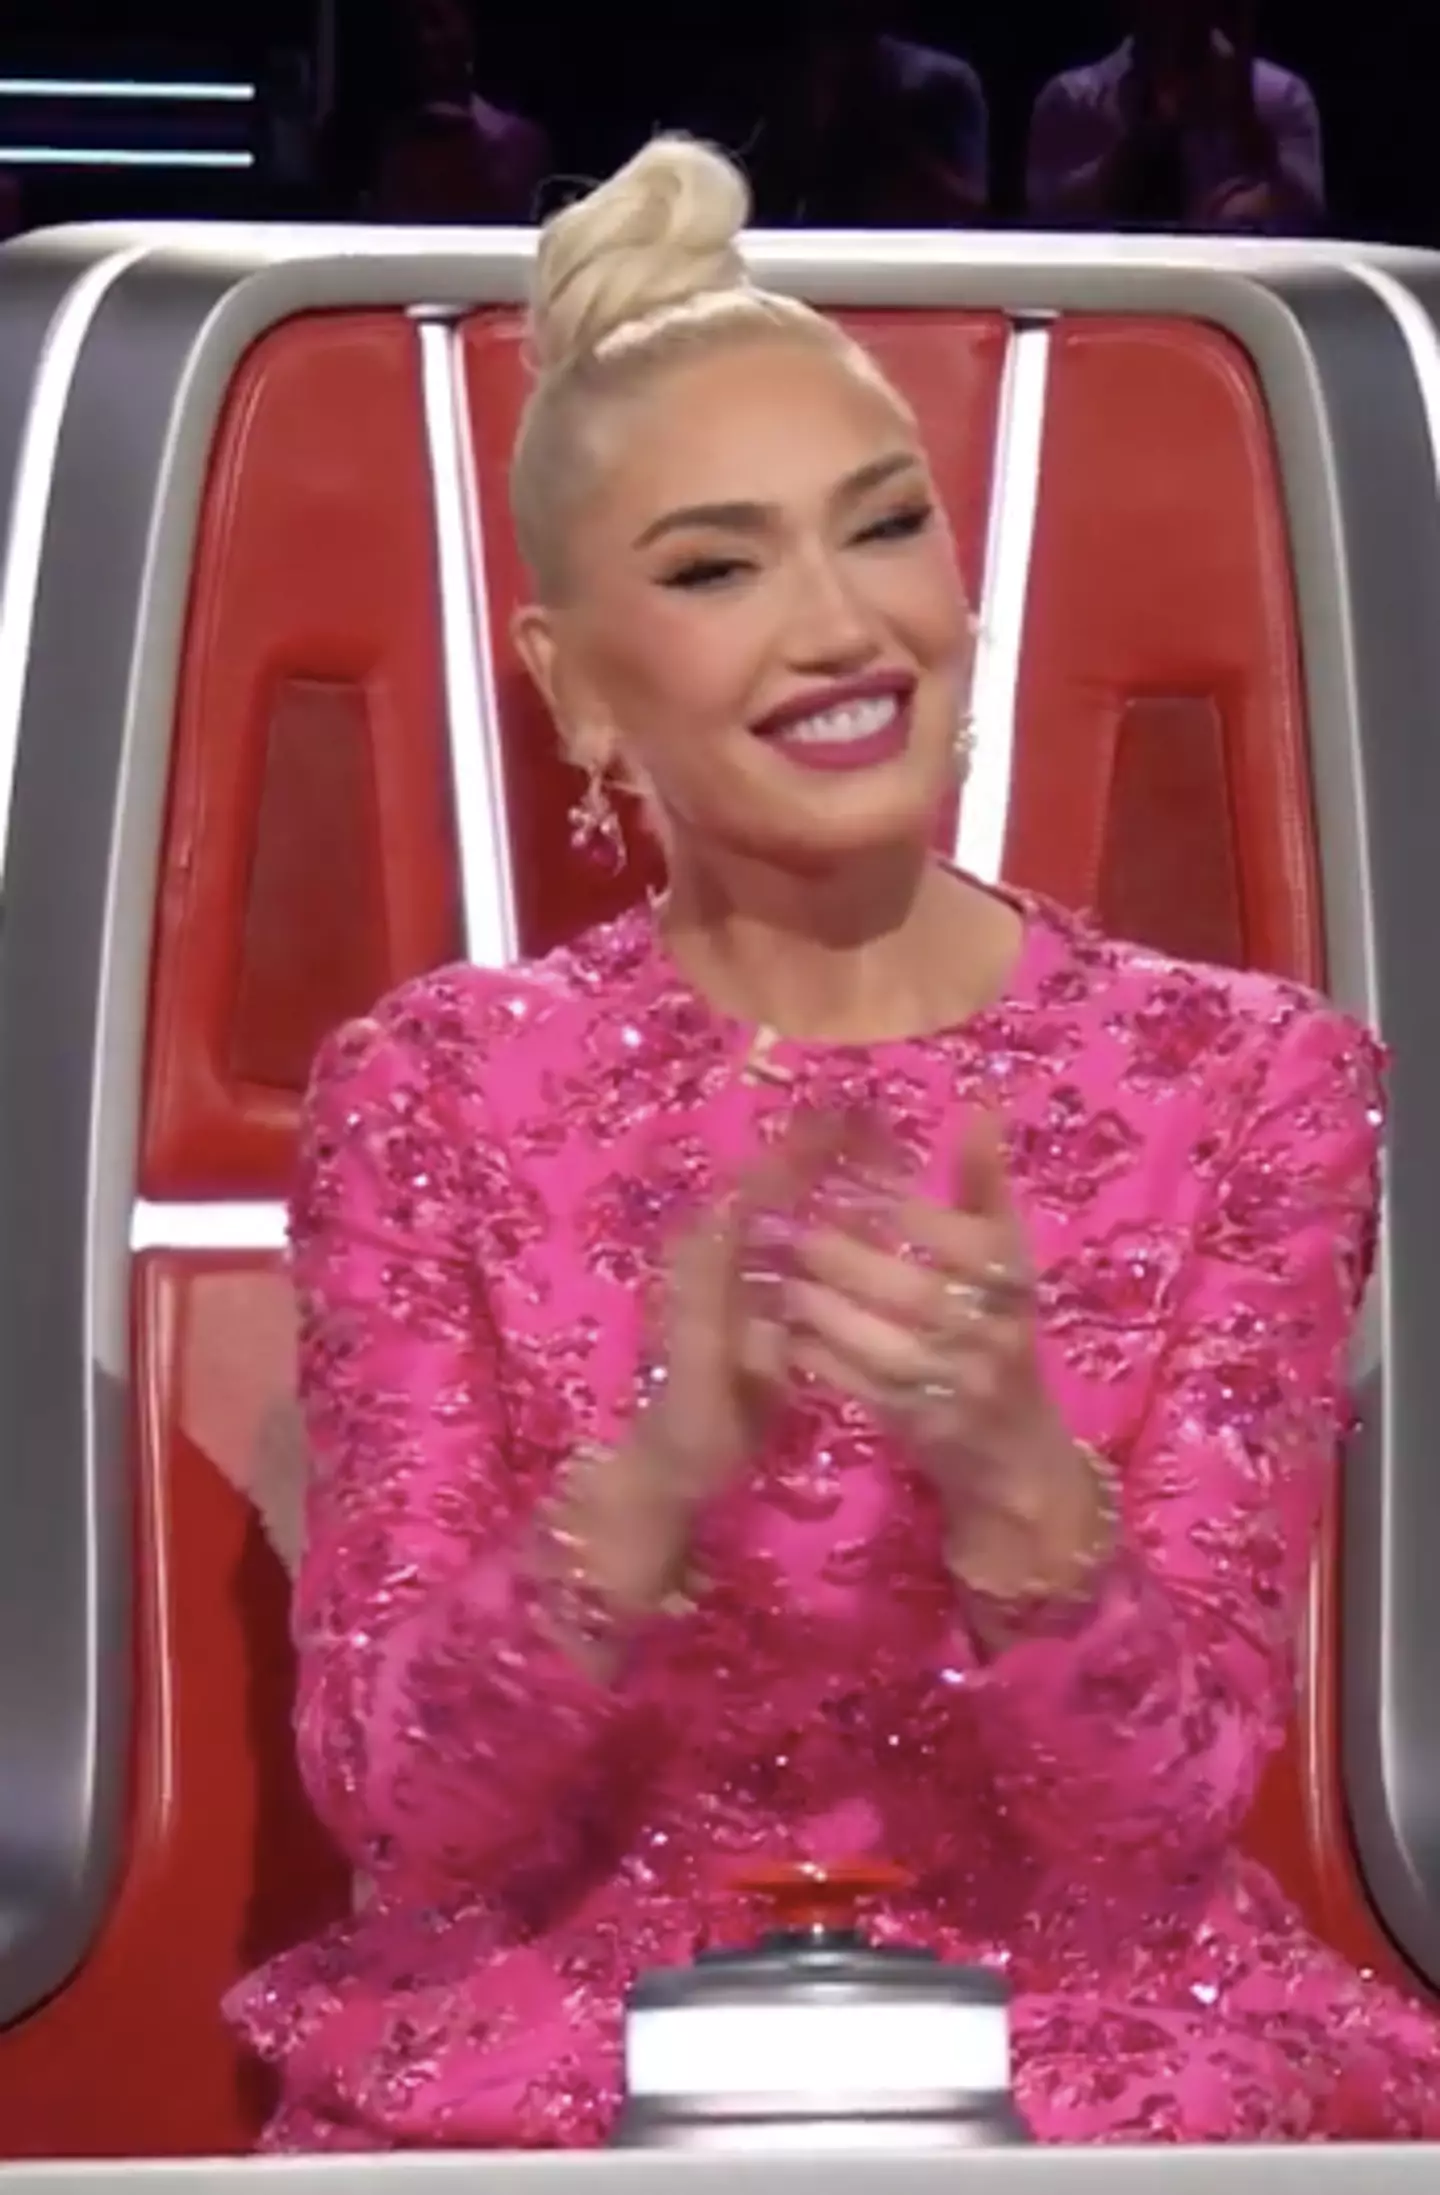 Gwen was criticised over her new look last September.